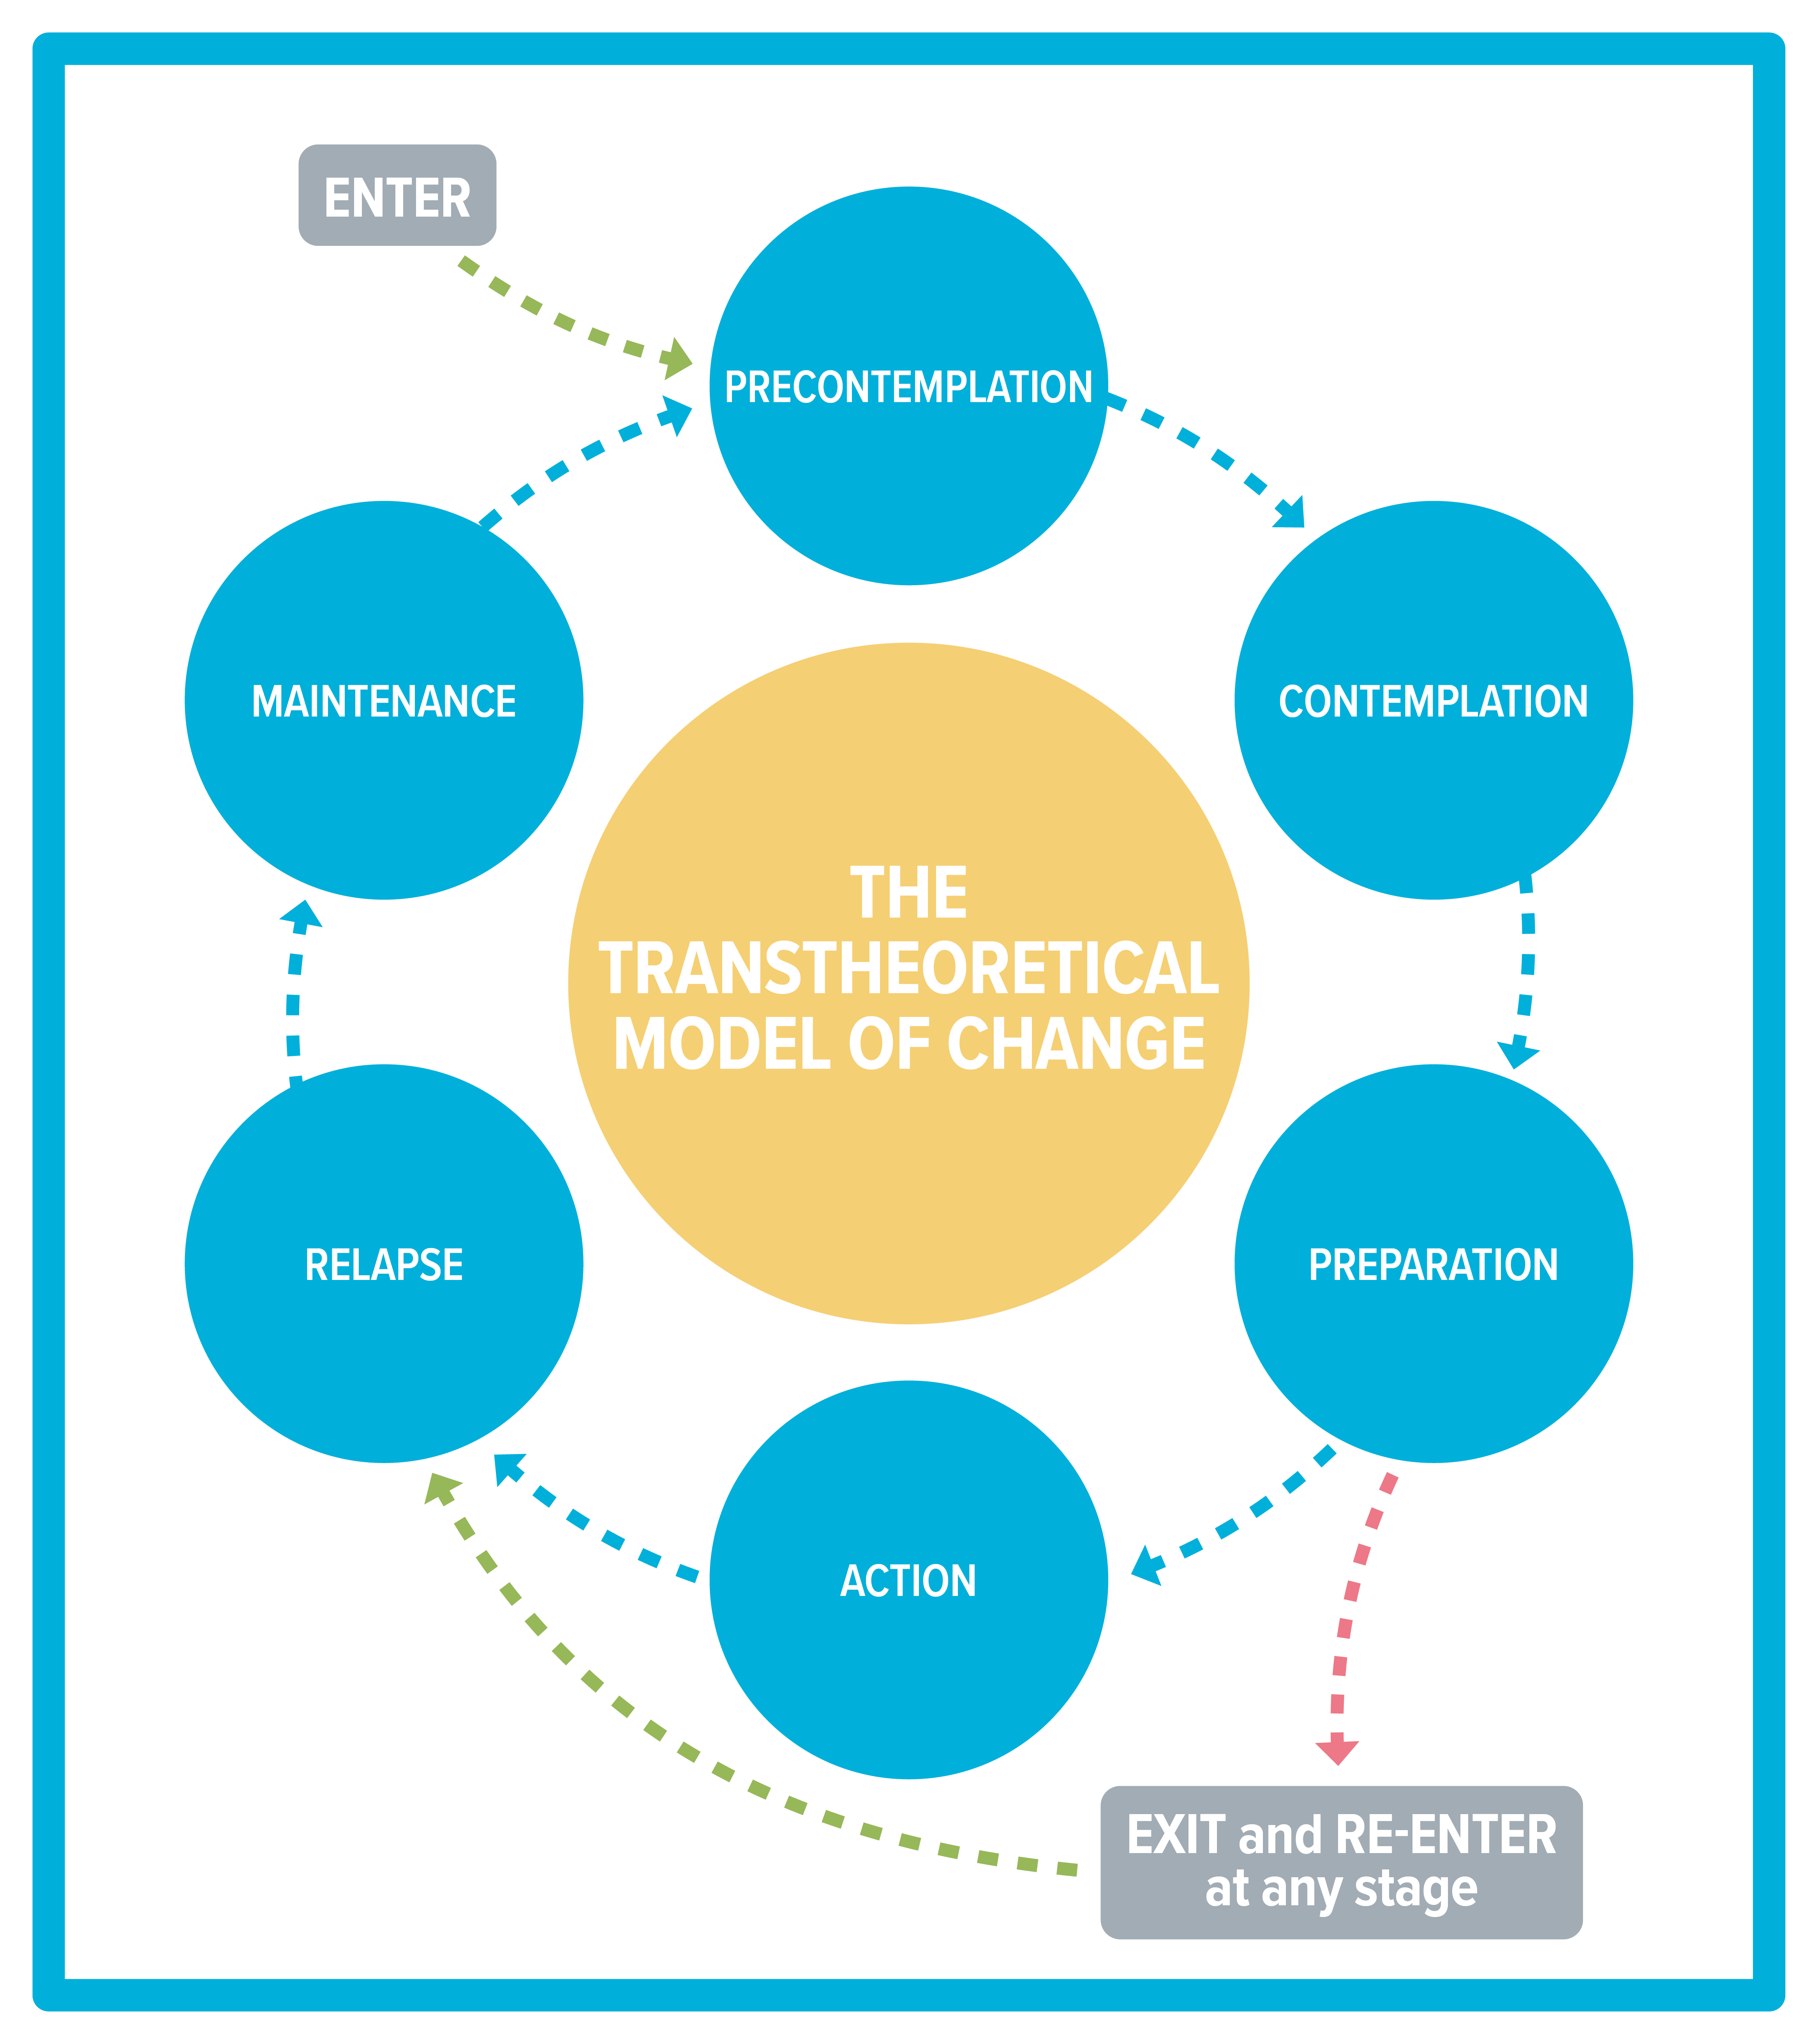 Image of transtheoretical model of change shows 6 stages of change, arranged in a cycle. Although people may enter or exit at any phase, typically people enter in the precontemplation phase, then move to contemplation, then preparation, then action, then potentially relapse, then ideally enter a maintenance phase.